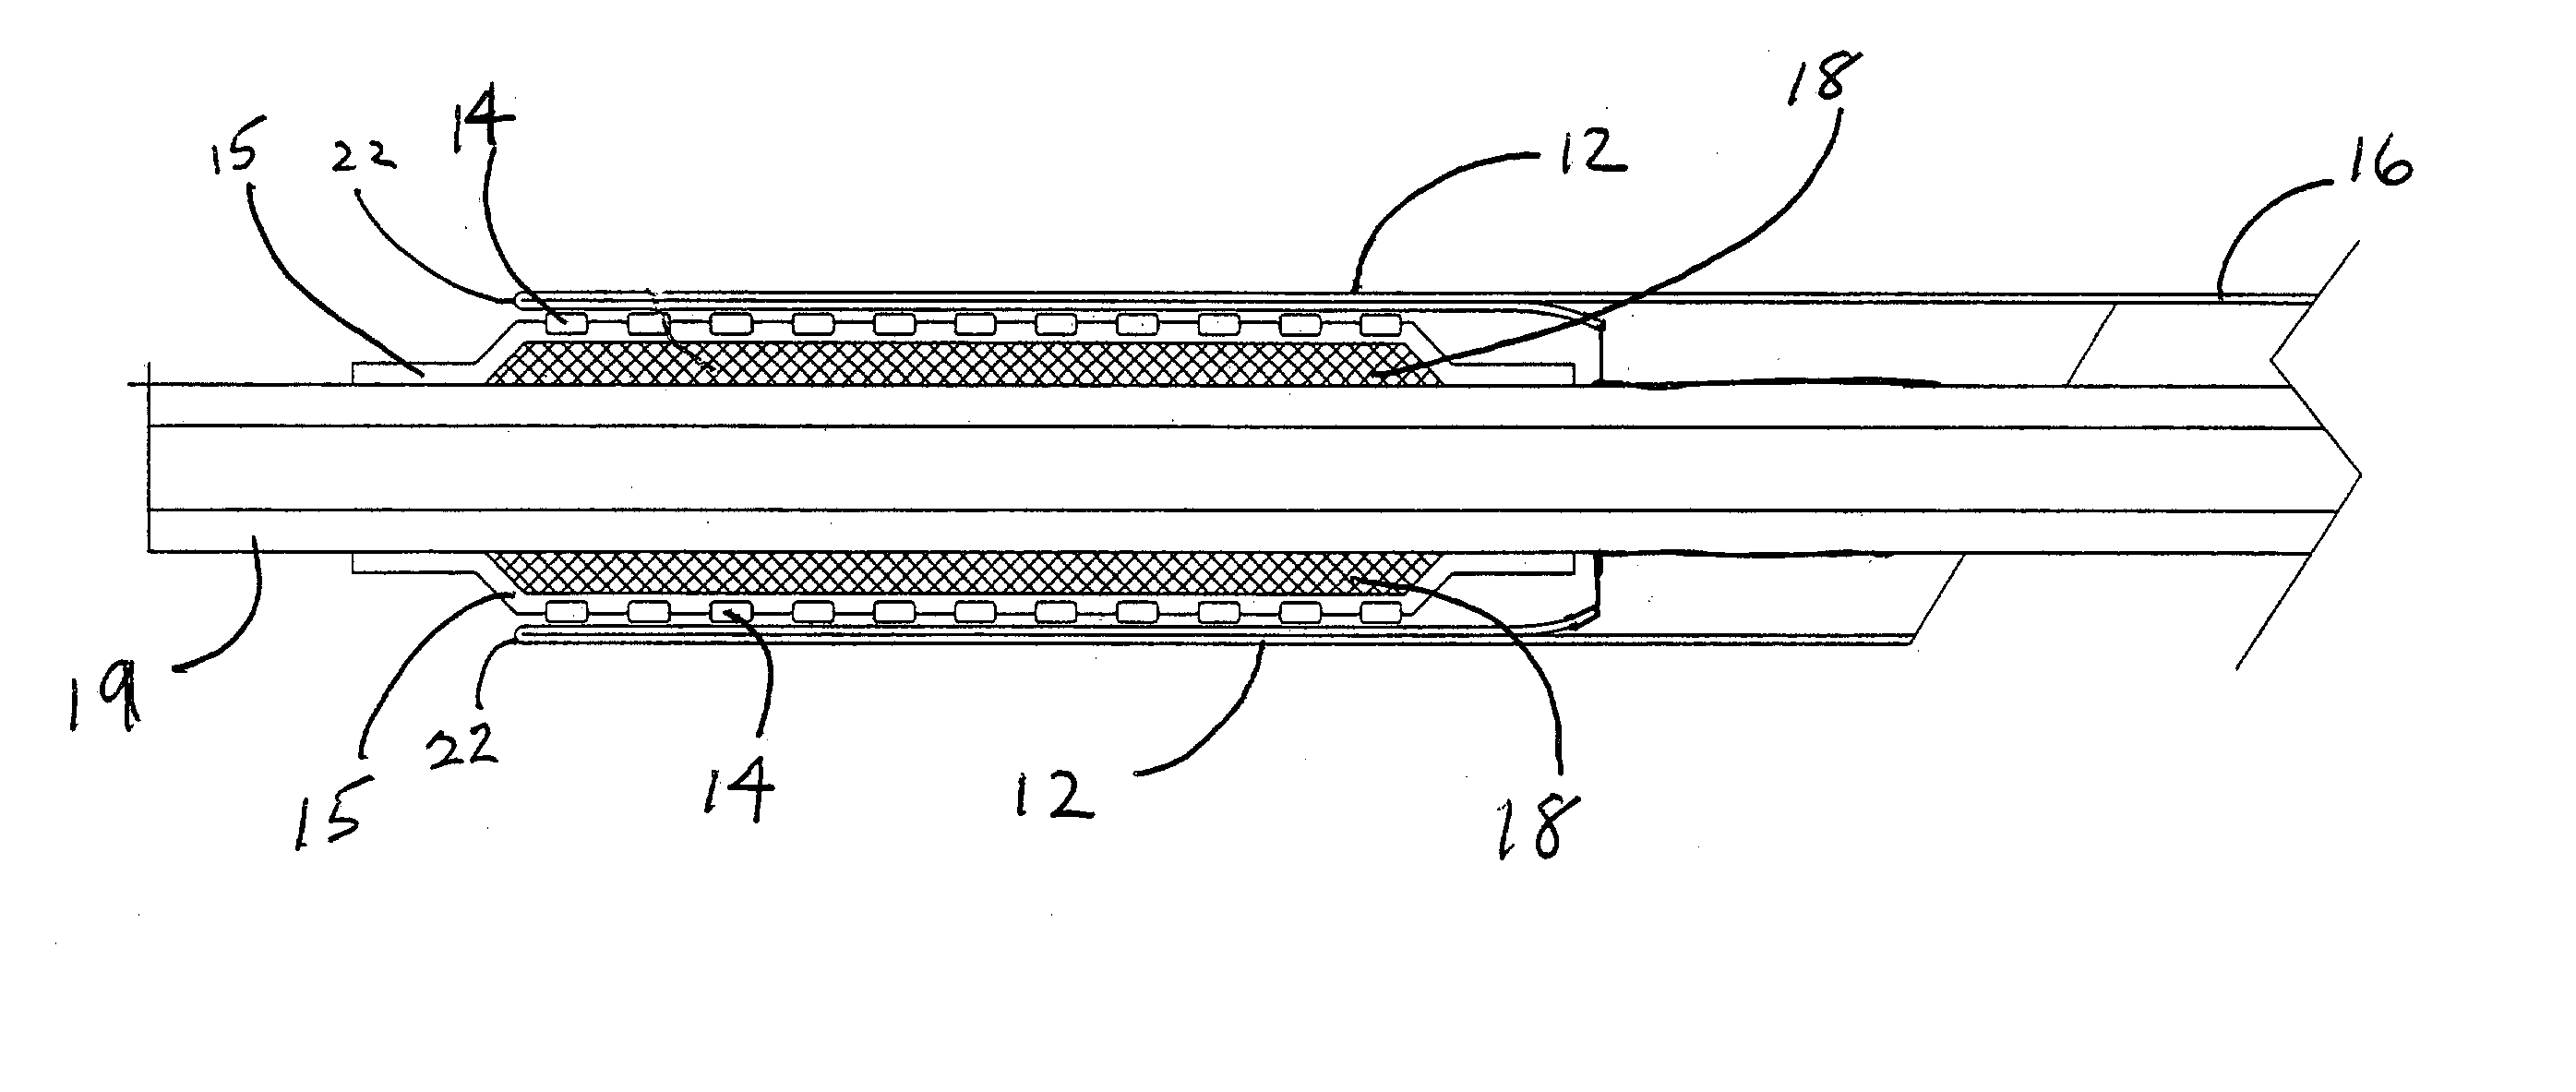 Deployment system for an endoluminal device